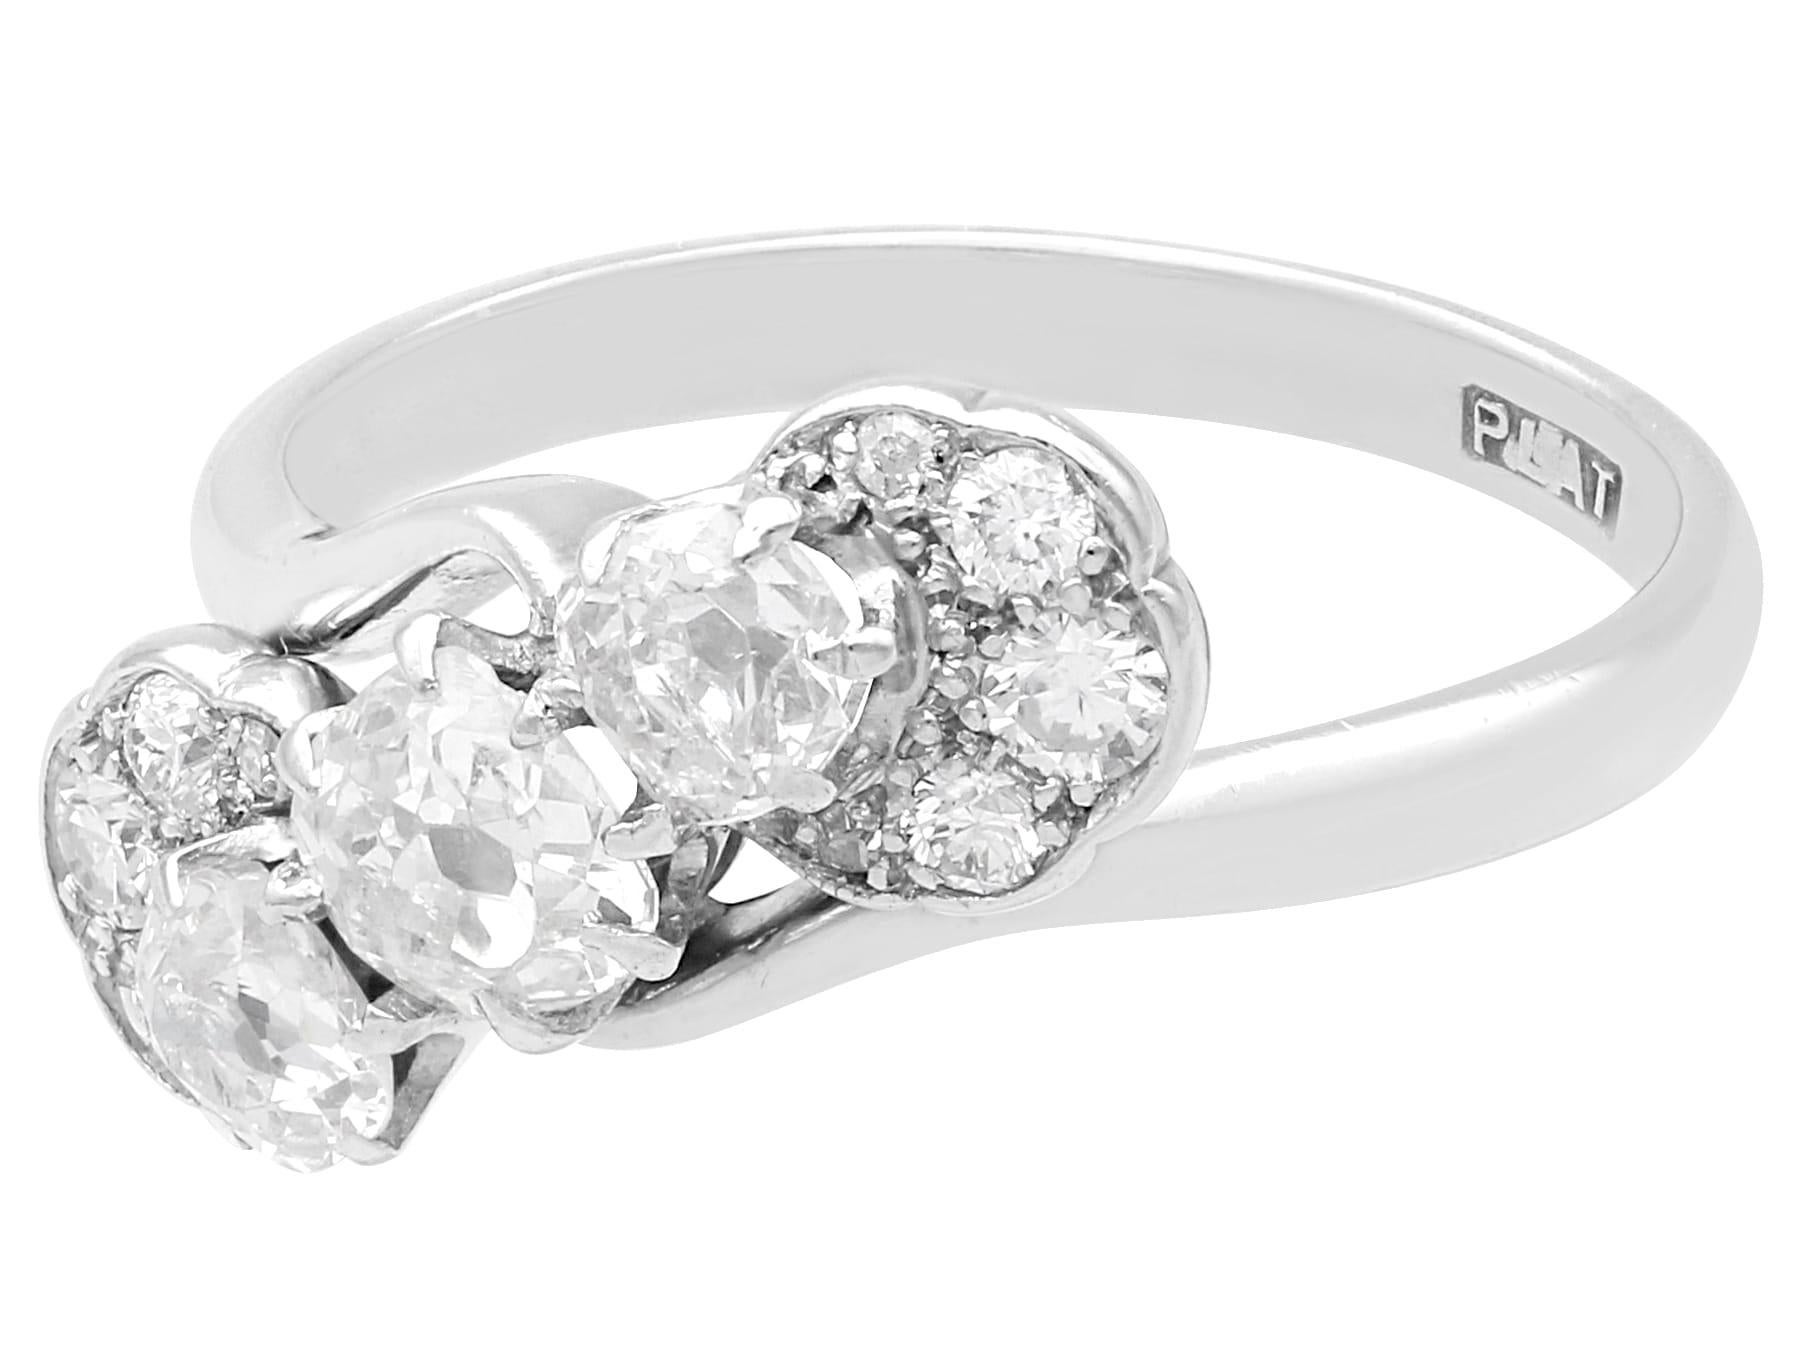 A stunning, fine and impressive antique 1.65 carat diamond and platinum trilogy ring; part of our diverse engagement rings collection.

This stunning, fine and impressive antique diamond twist ring has been crafted in platinum.

The pierced